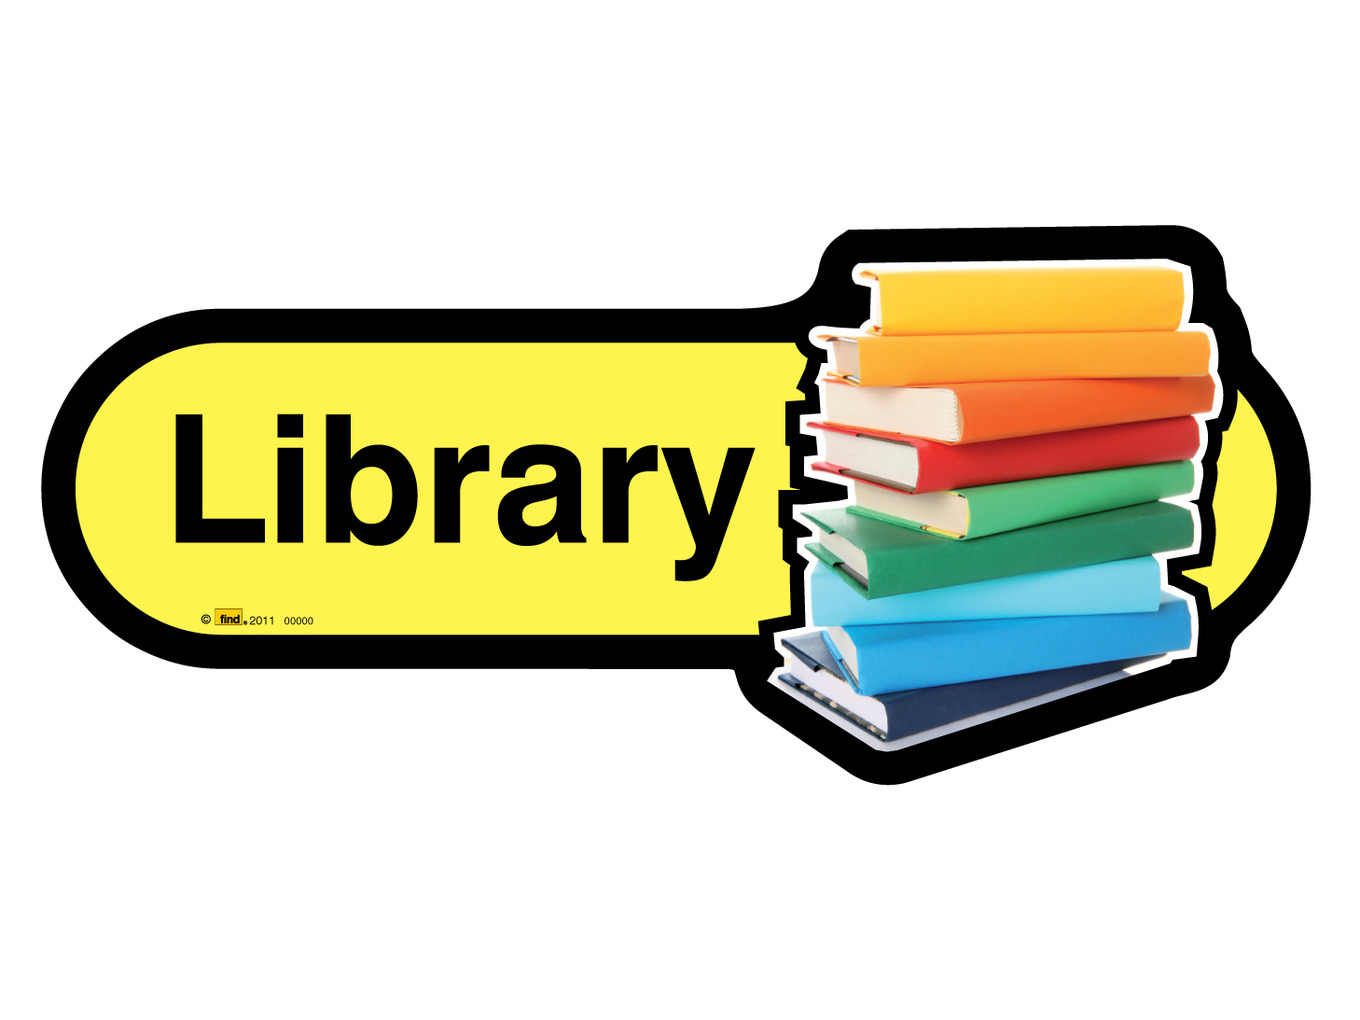 products-signage-library-sign-training-2-care-uk-ltd